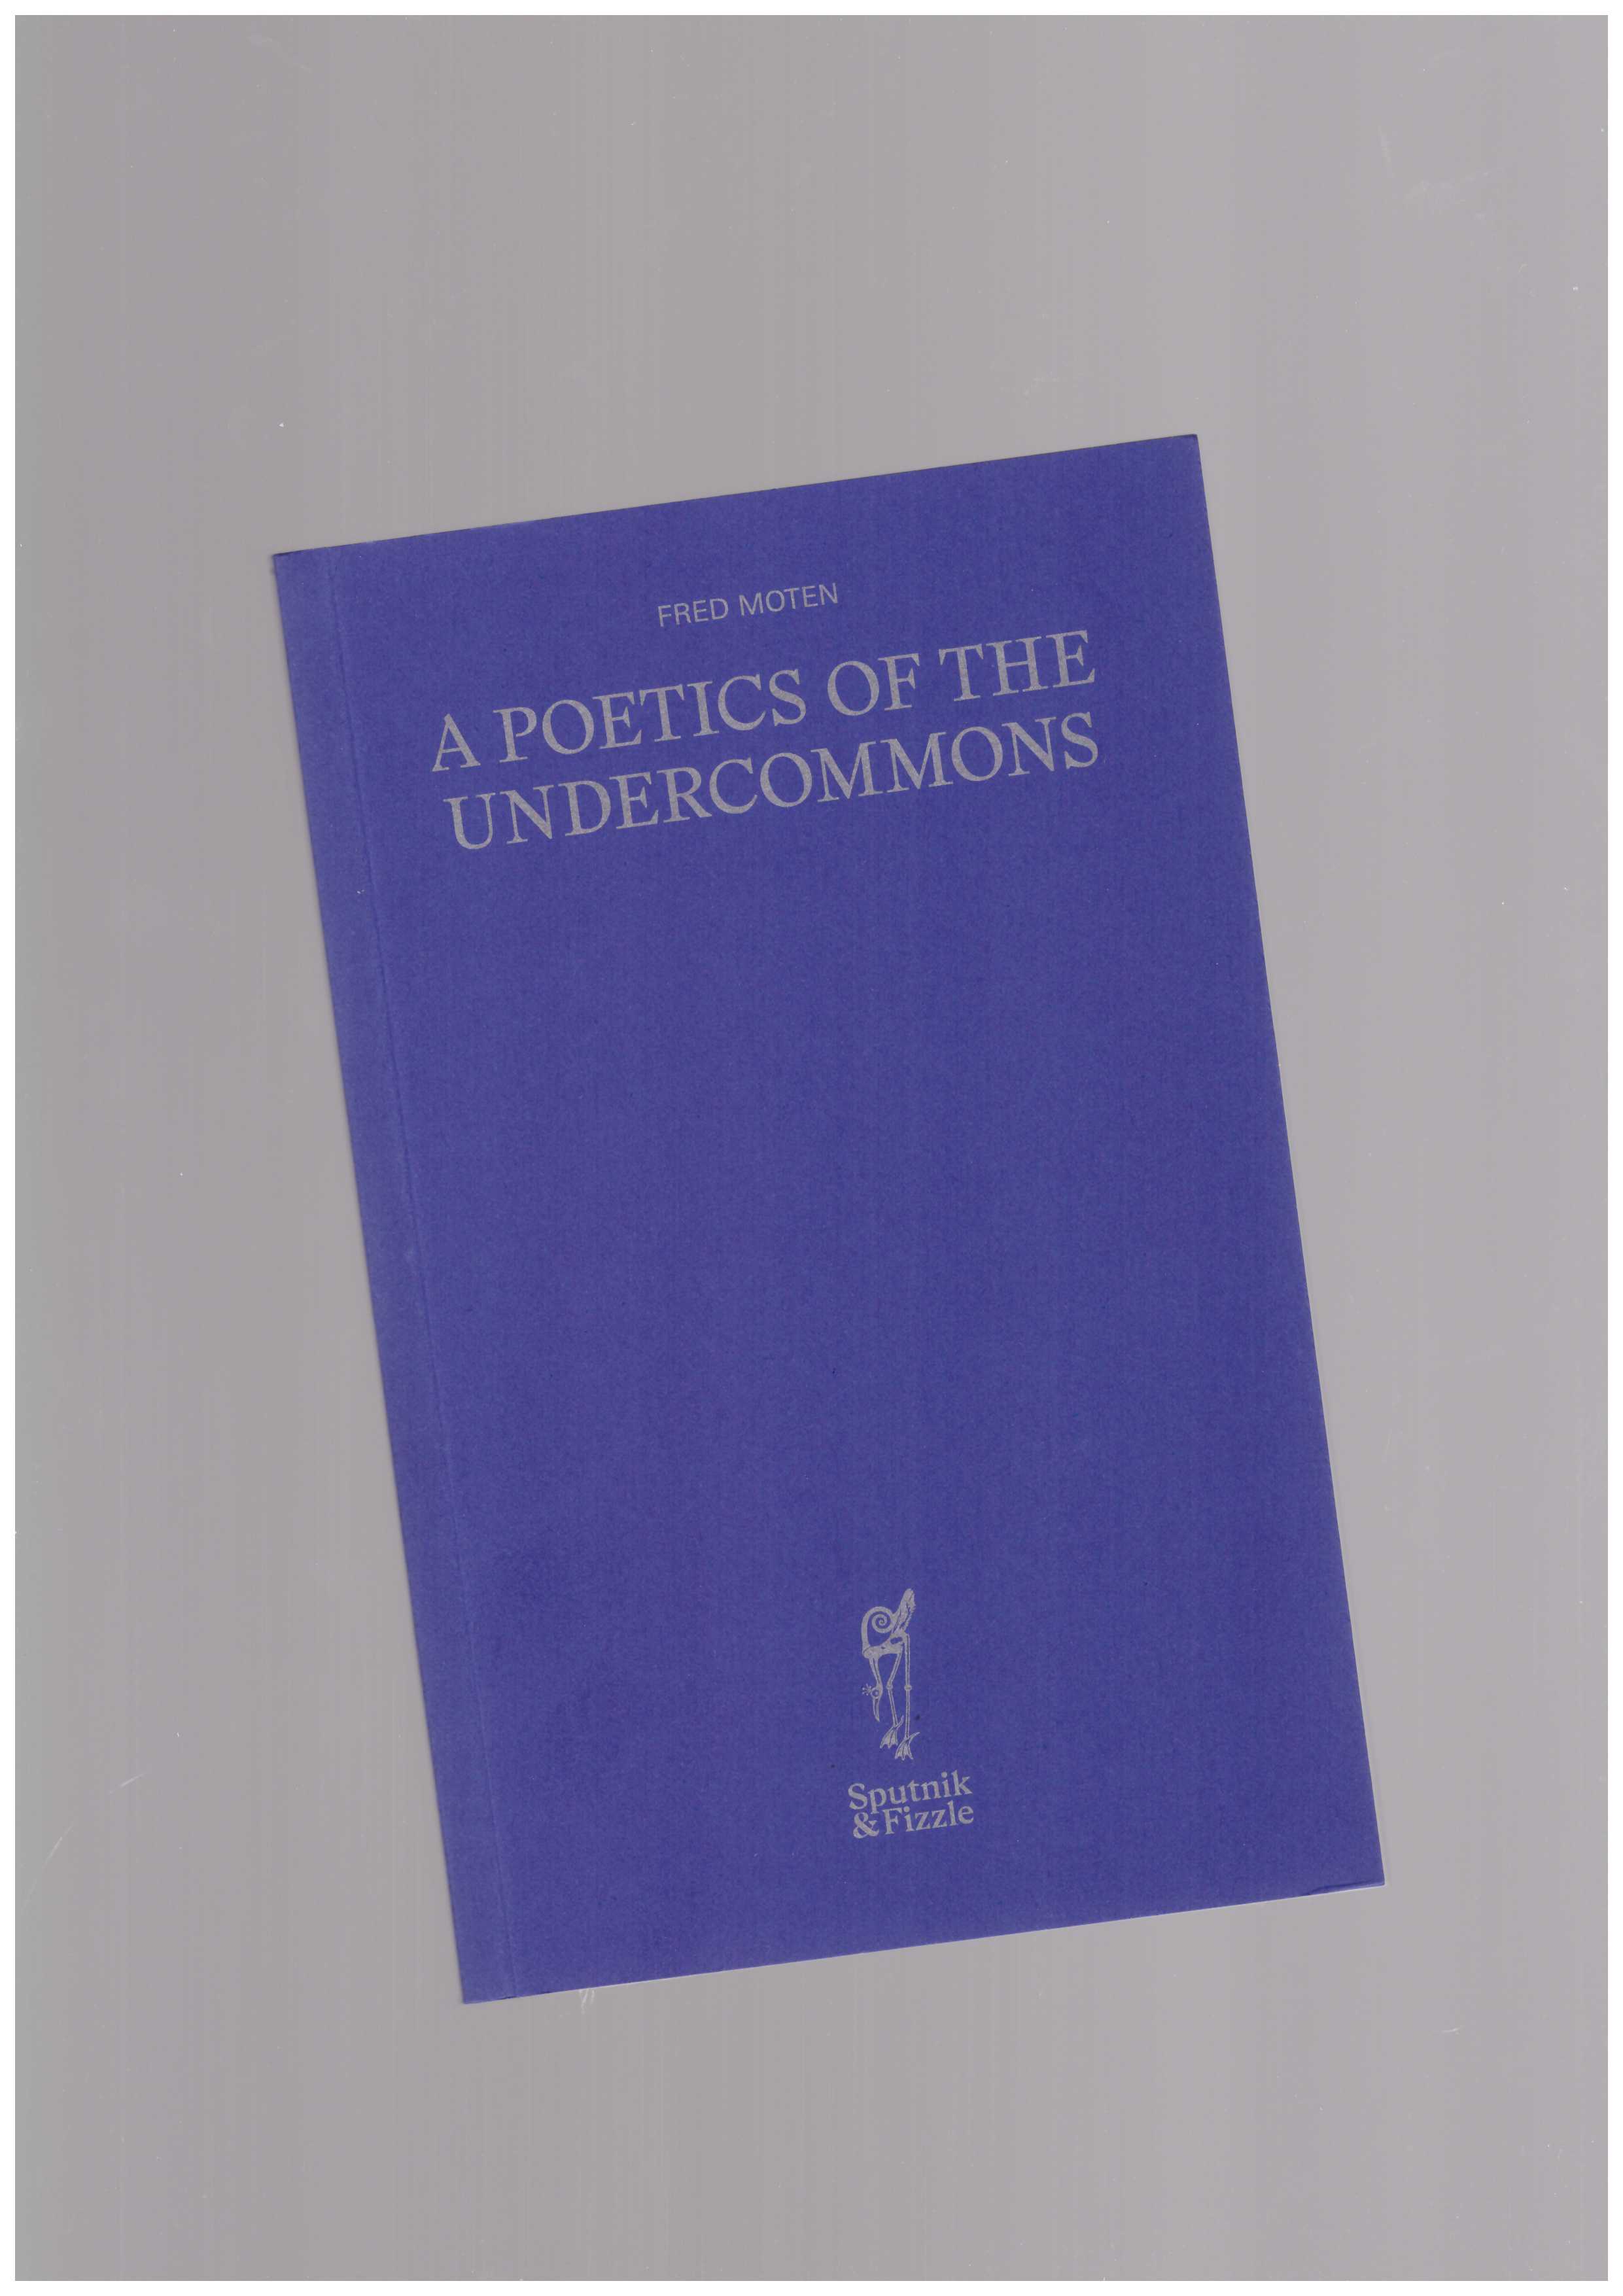 MOTEN, Fred - A Poetics of the Undercommons